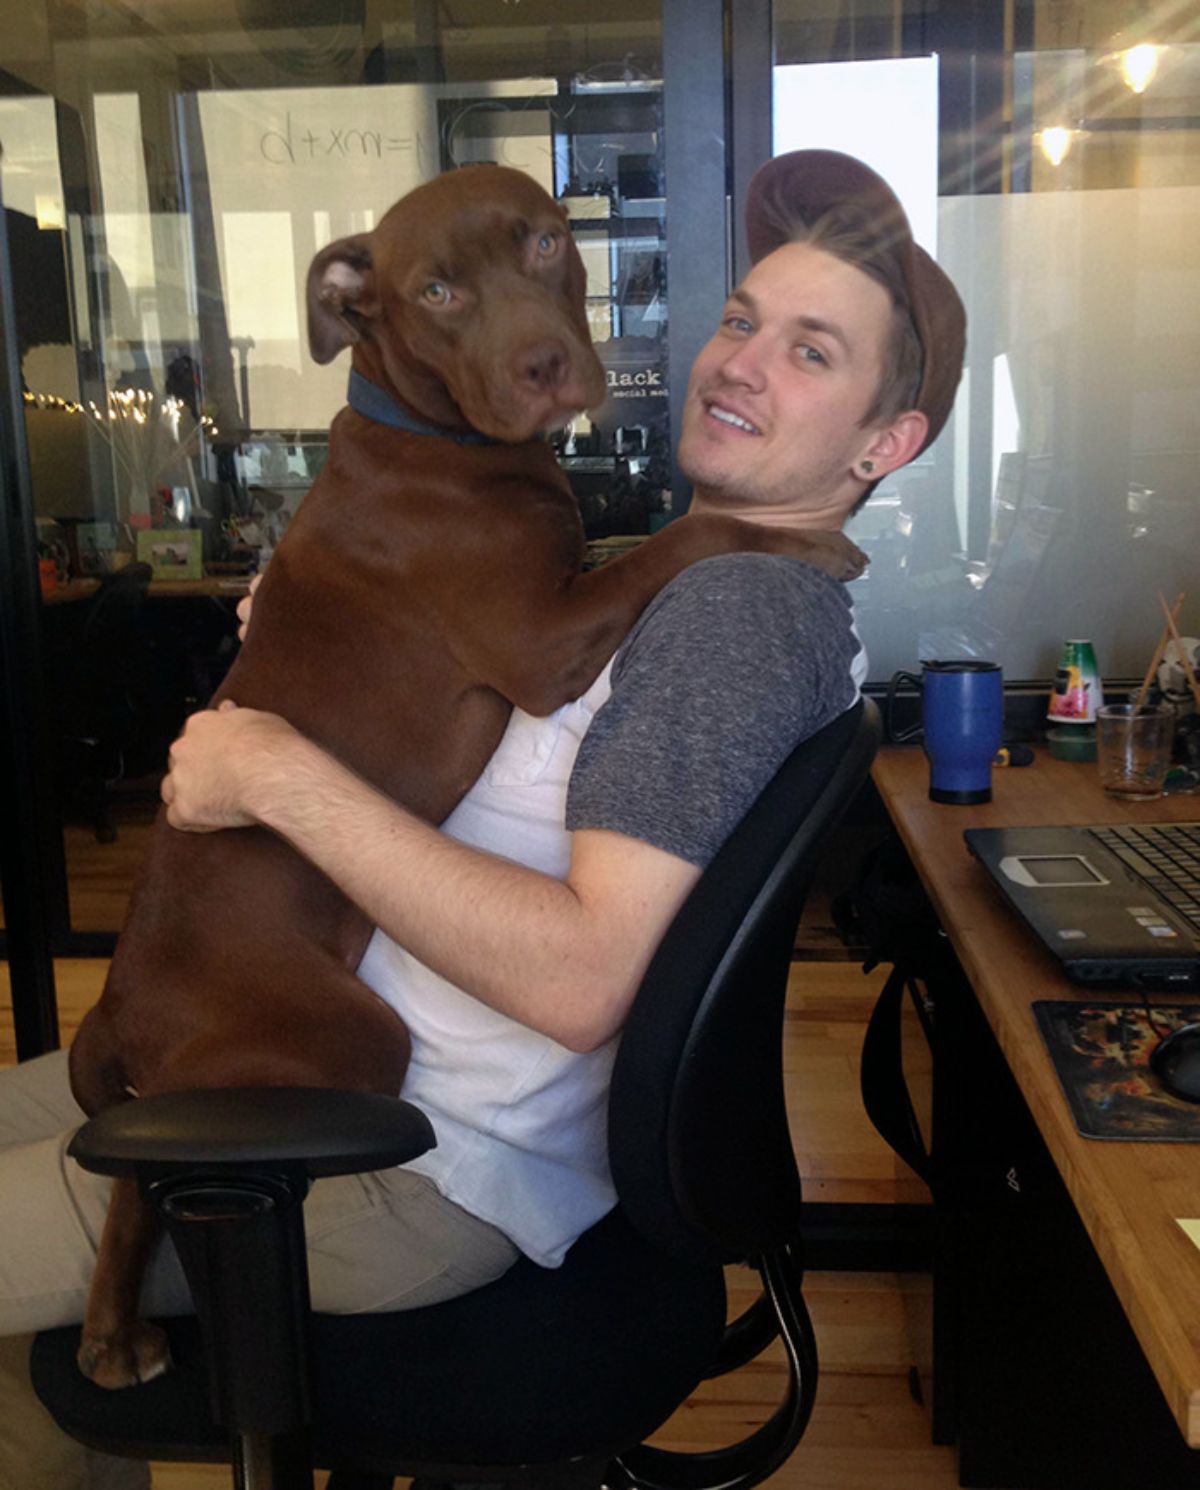 brown dog sitting astride a man's lap and being hugged